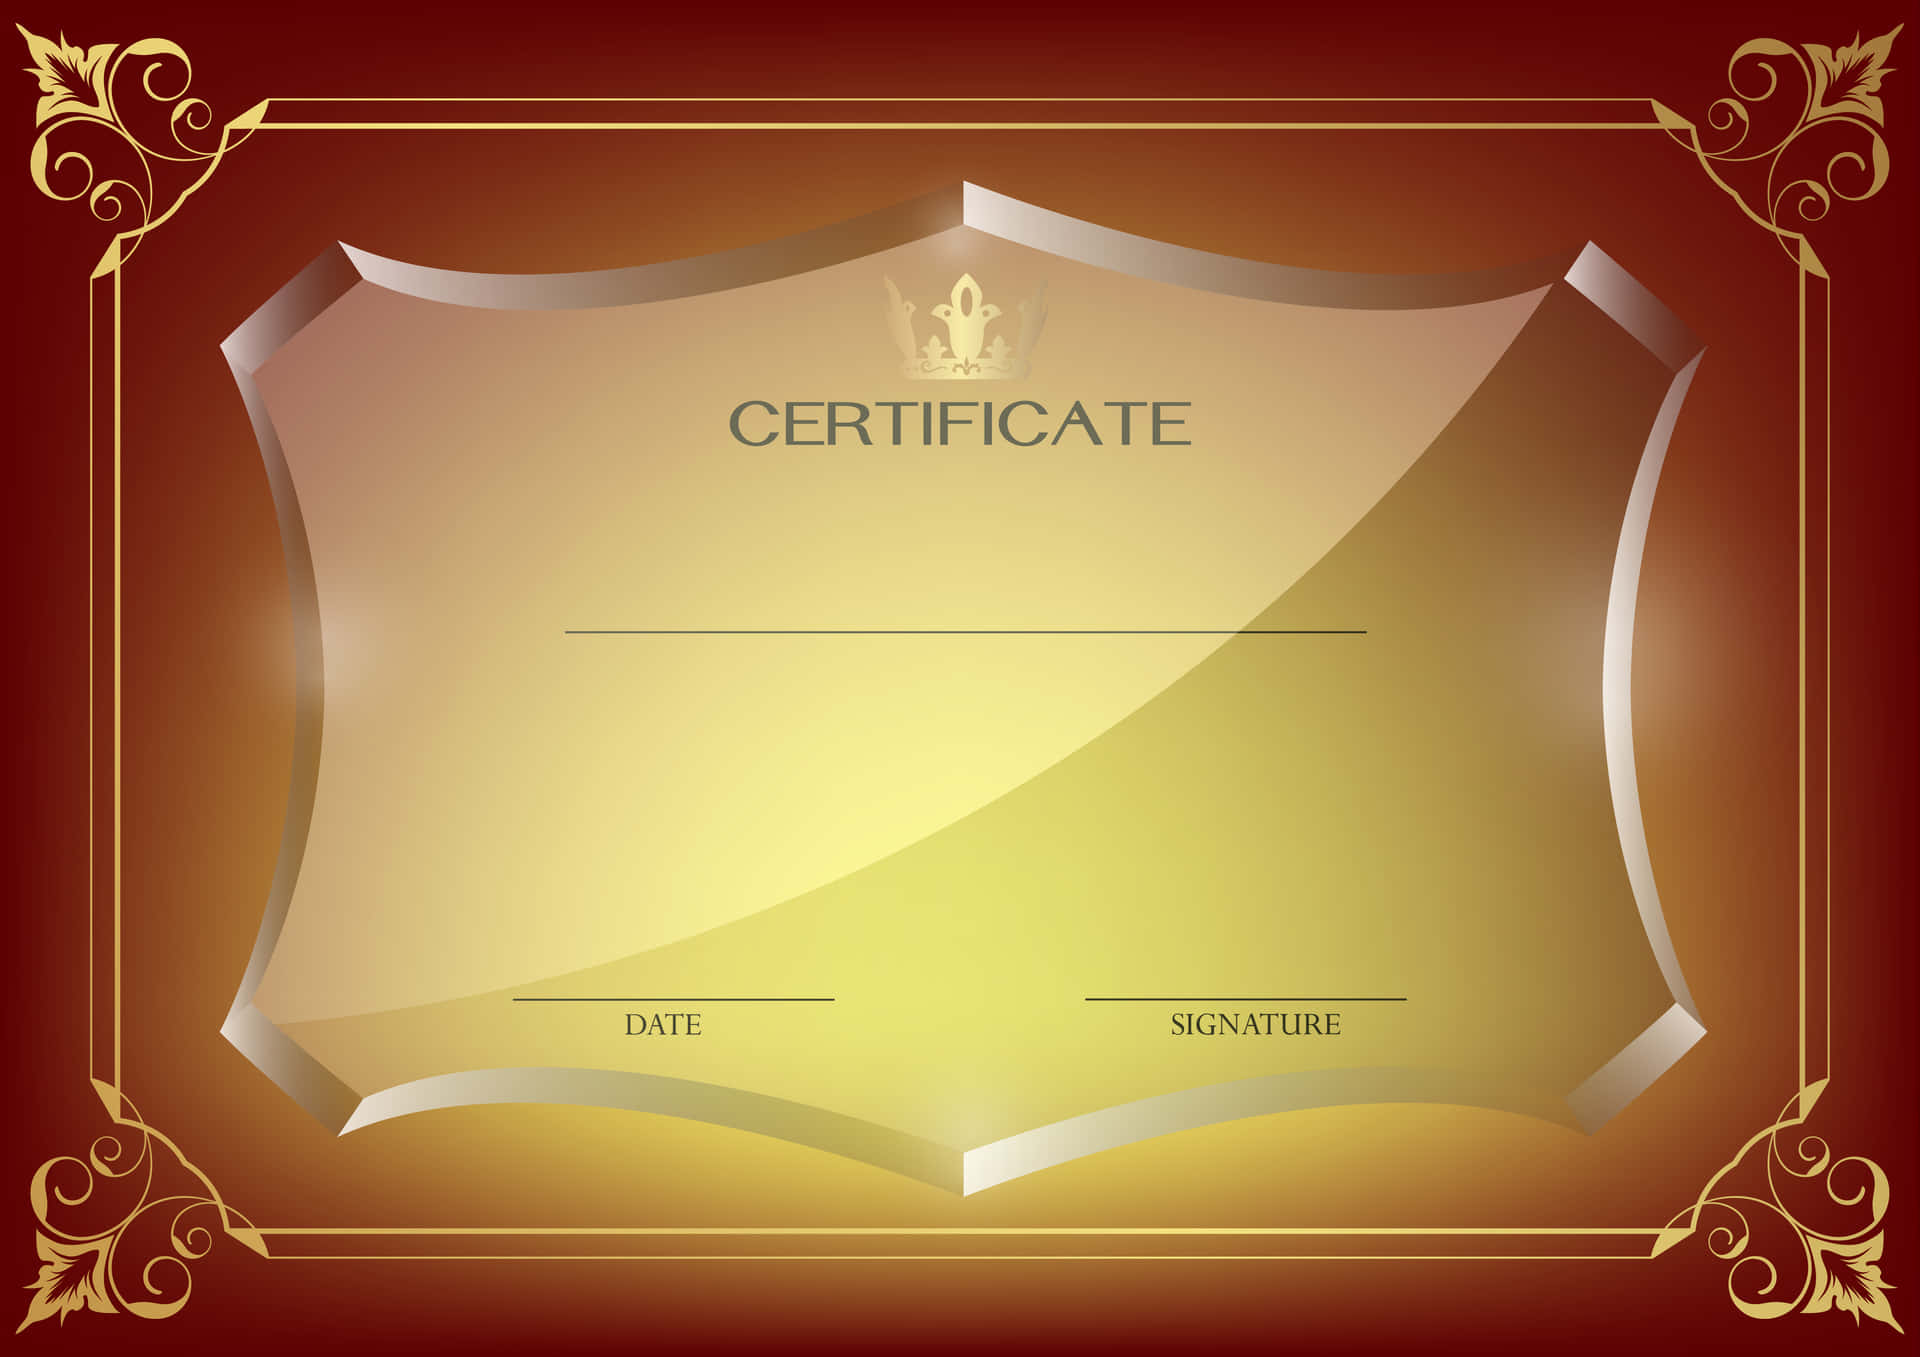 An Illustration of a Stylish Certificate